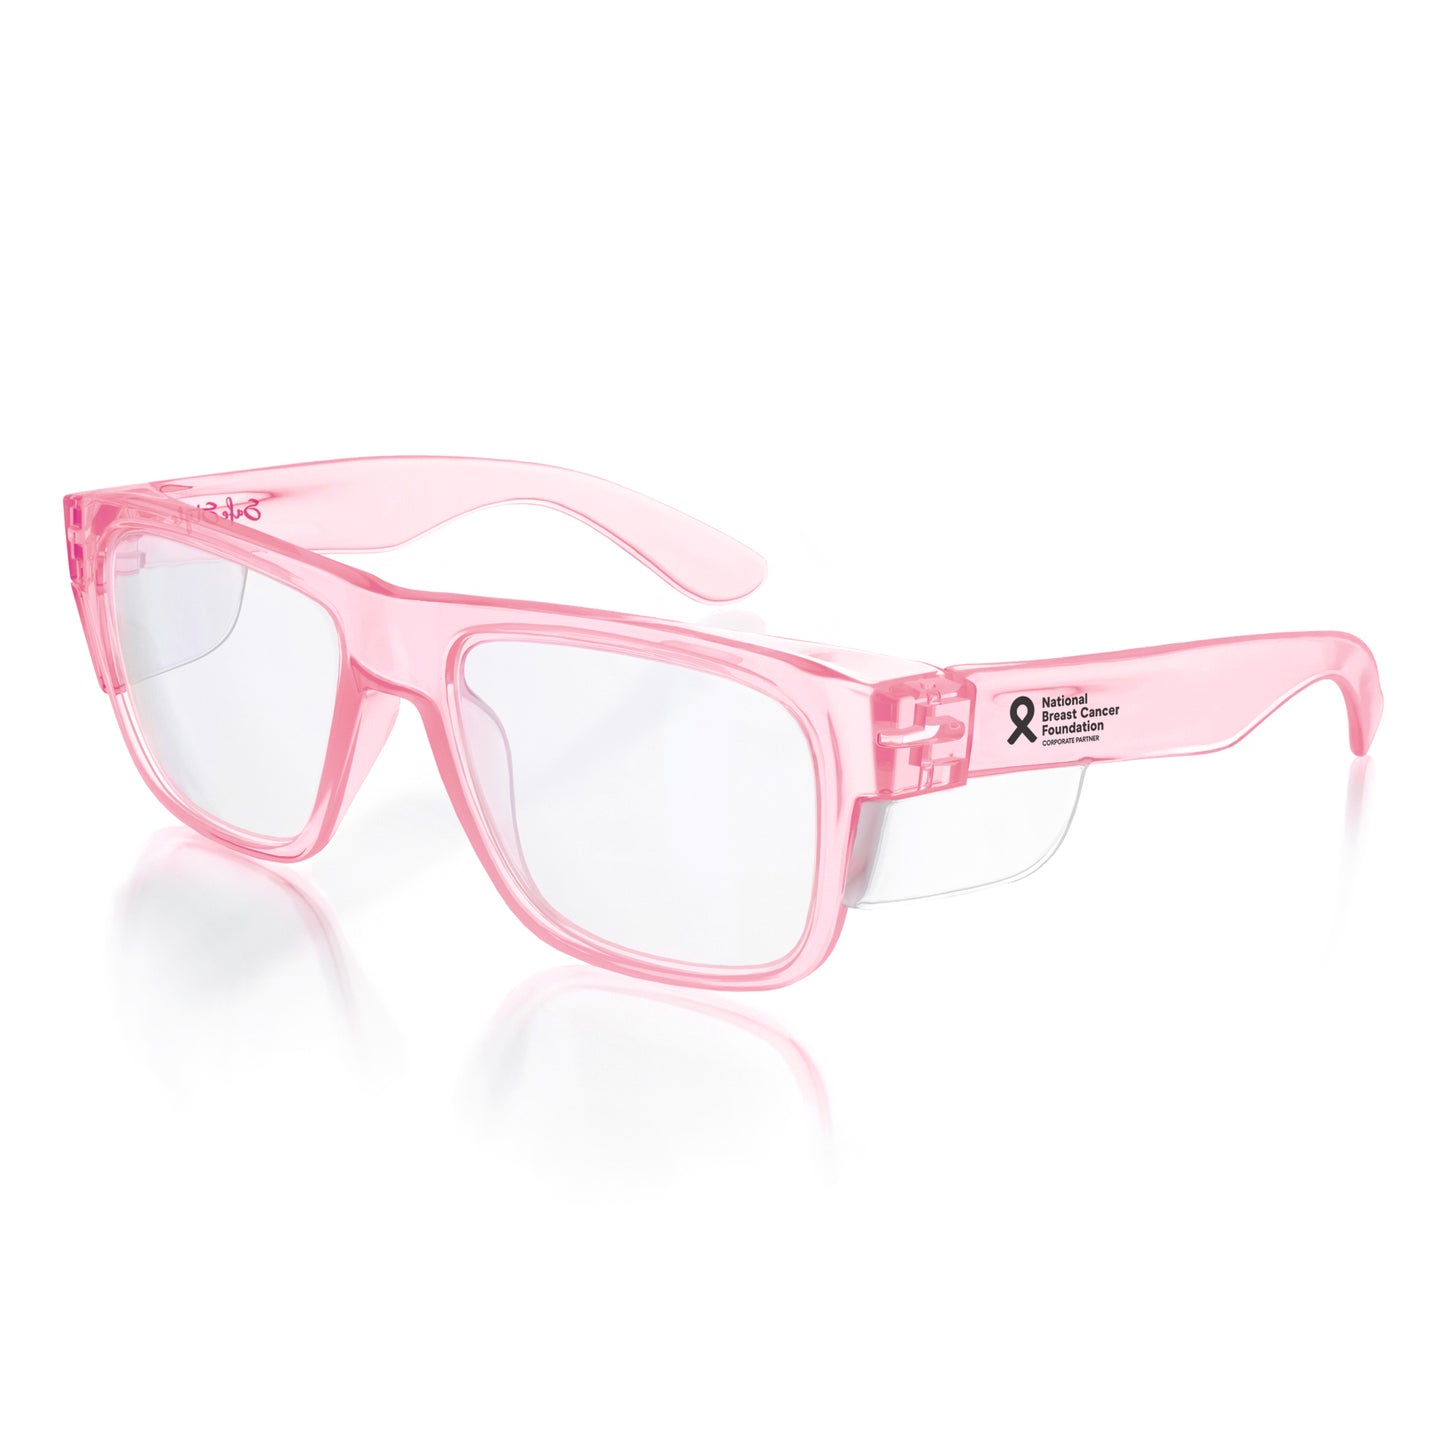 SafeStyle Fusions Pink Frame/Clear UV400